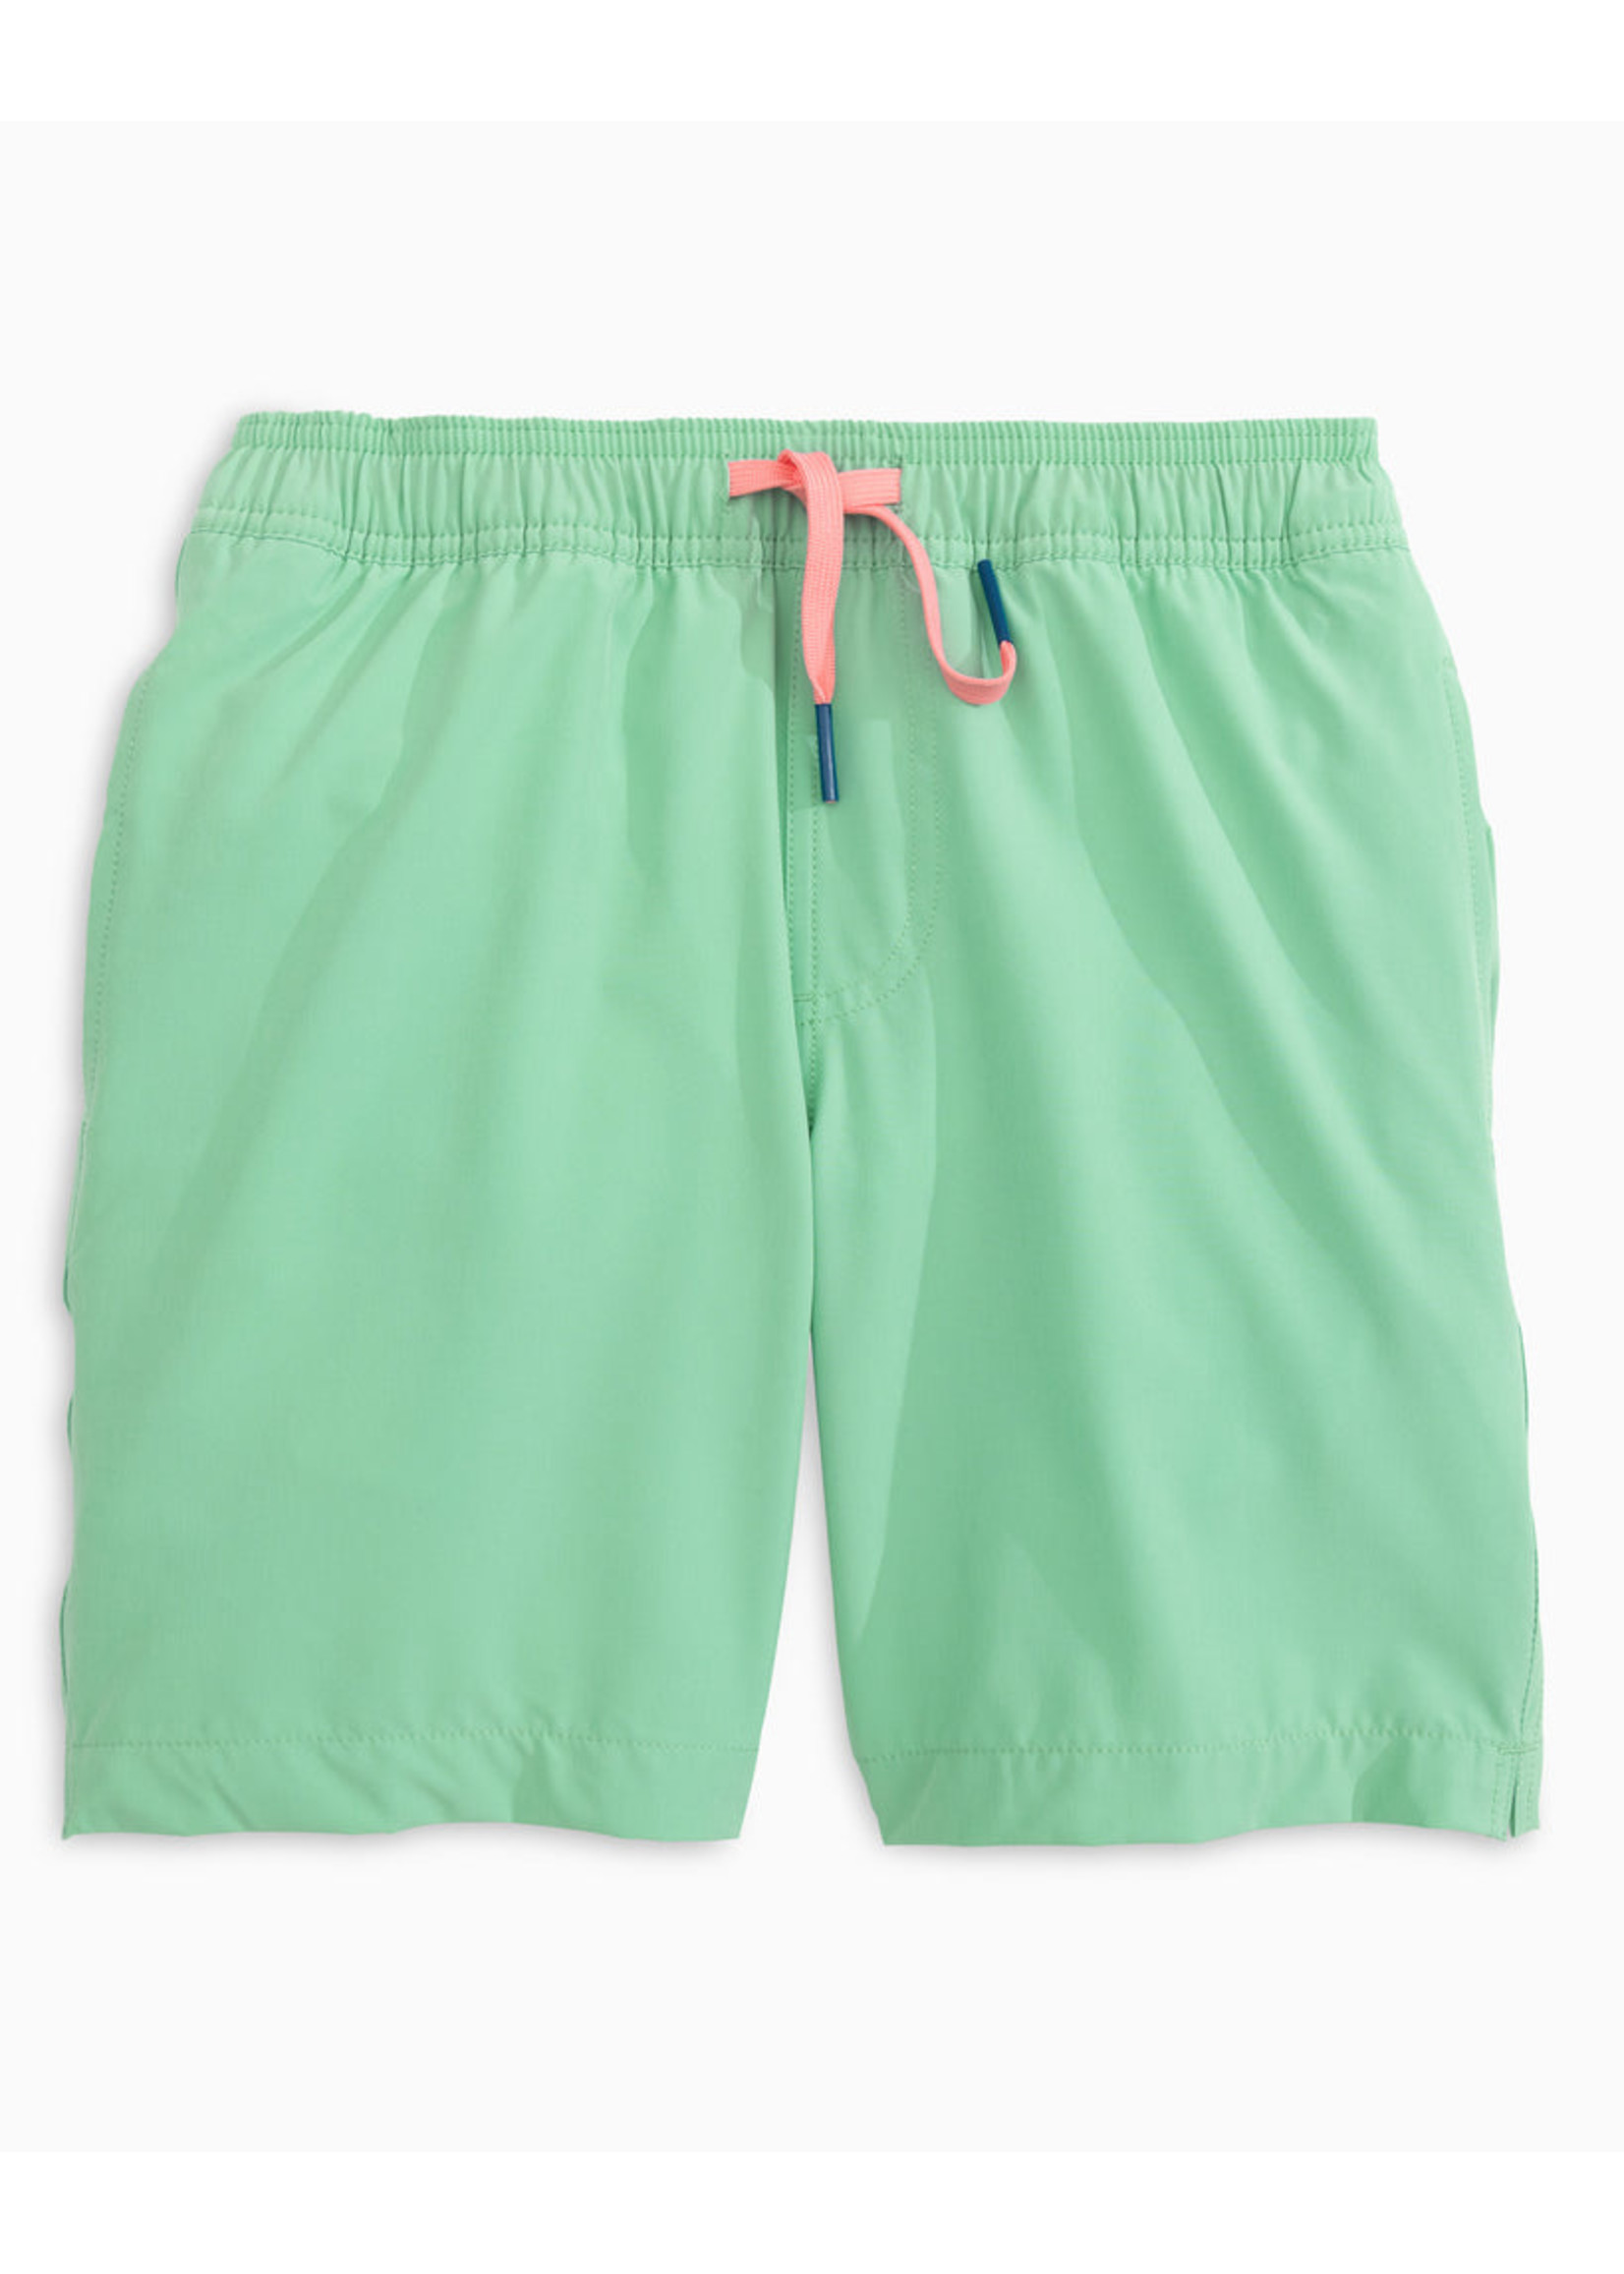 Southern Tide Southern Tide Isle of Pines Swim Trunks